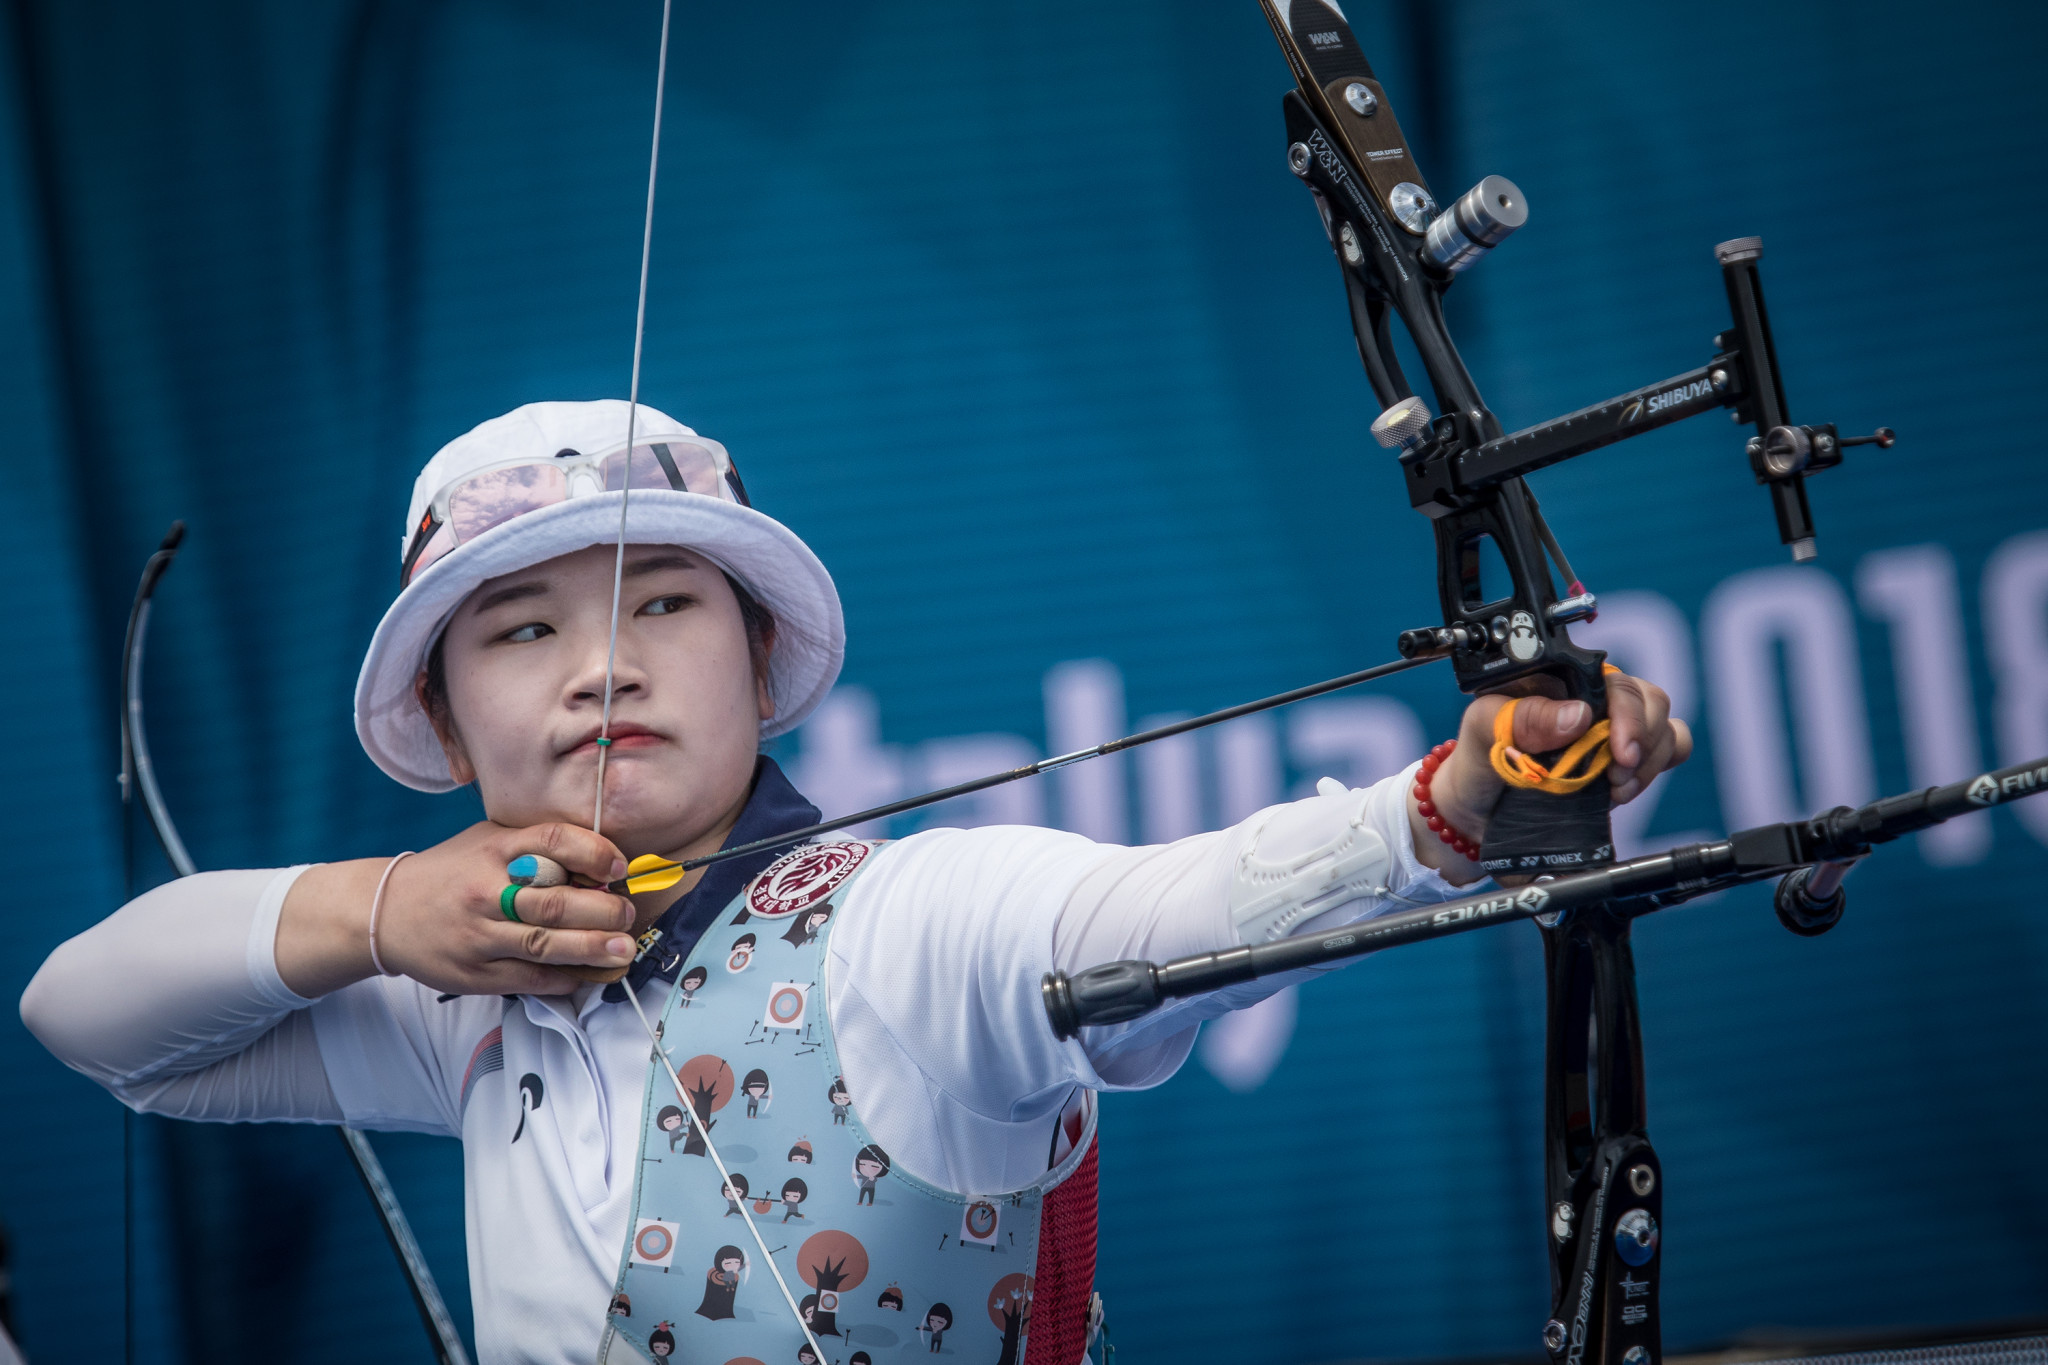 Kang eases into final at Indoor Archery World Series event in Nîmes 